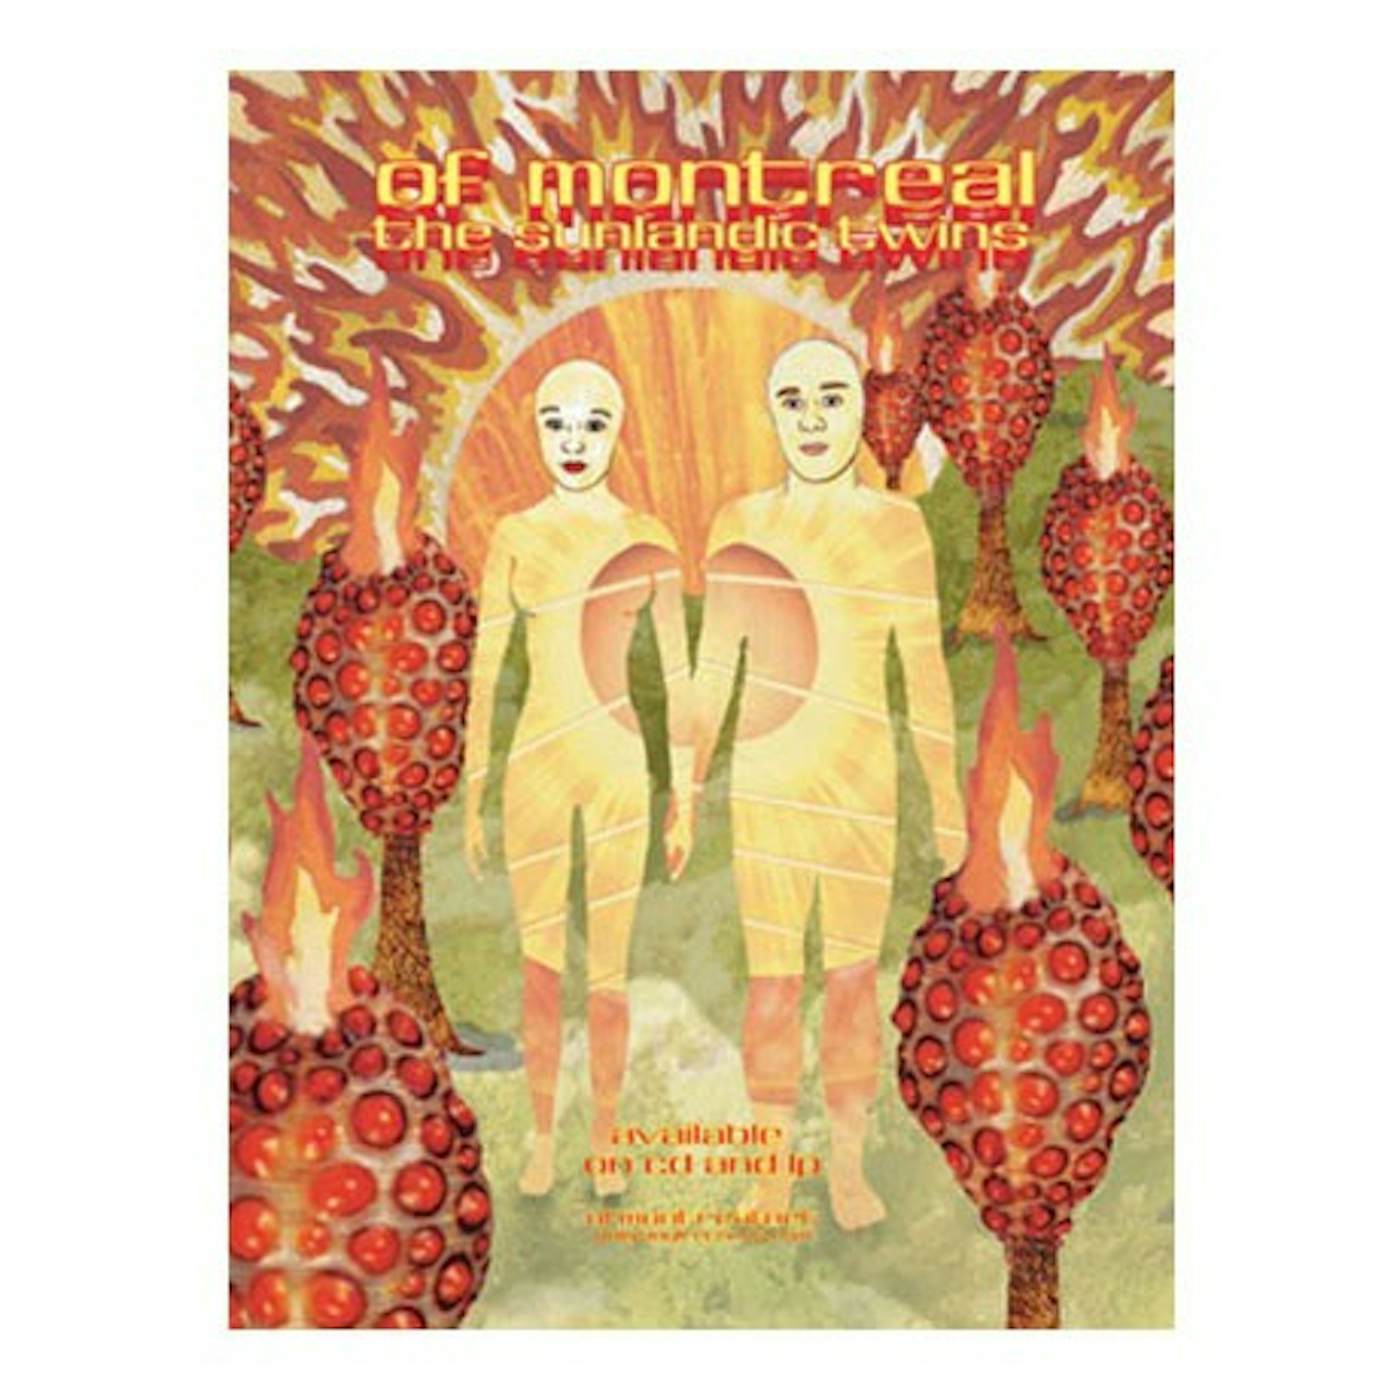 of Montreal The Sunlandic Twins Poster (18"x24")